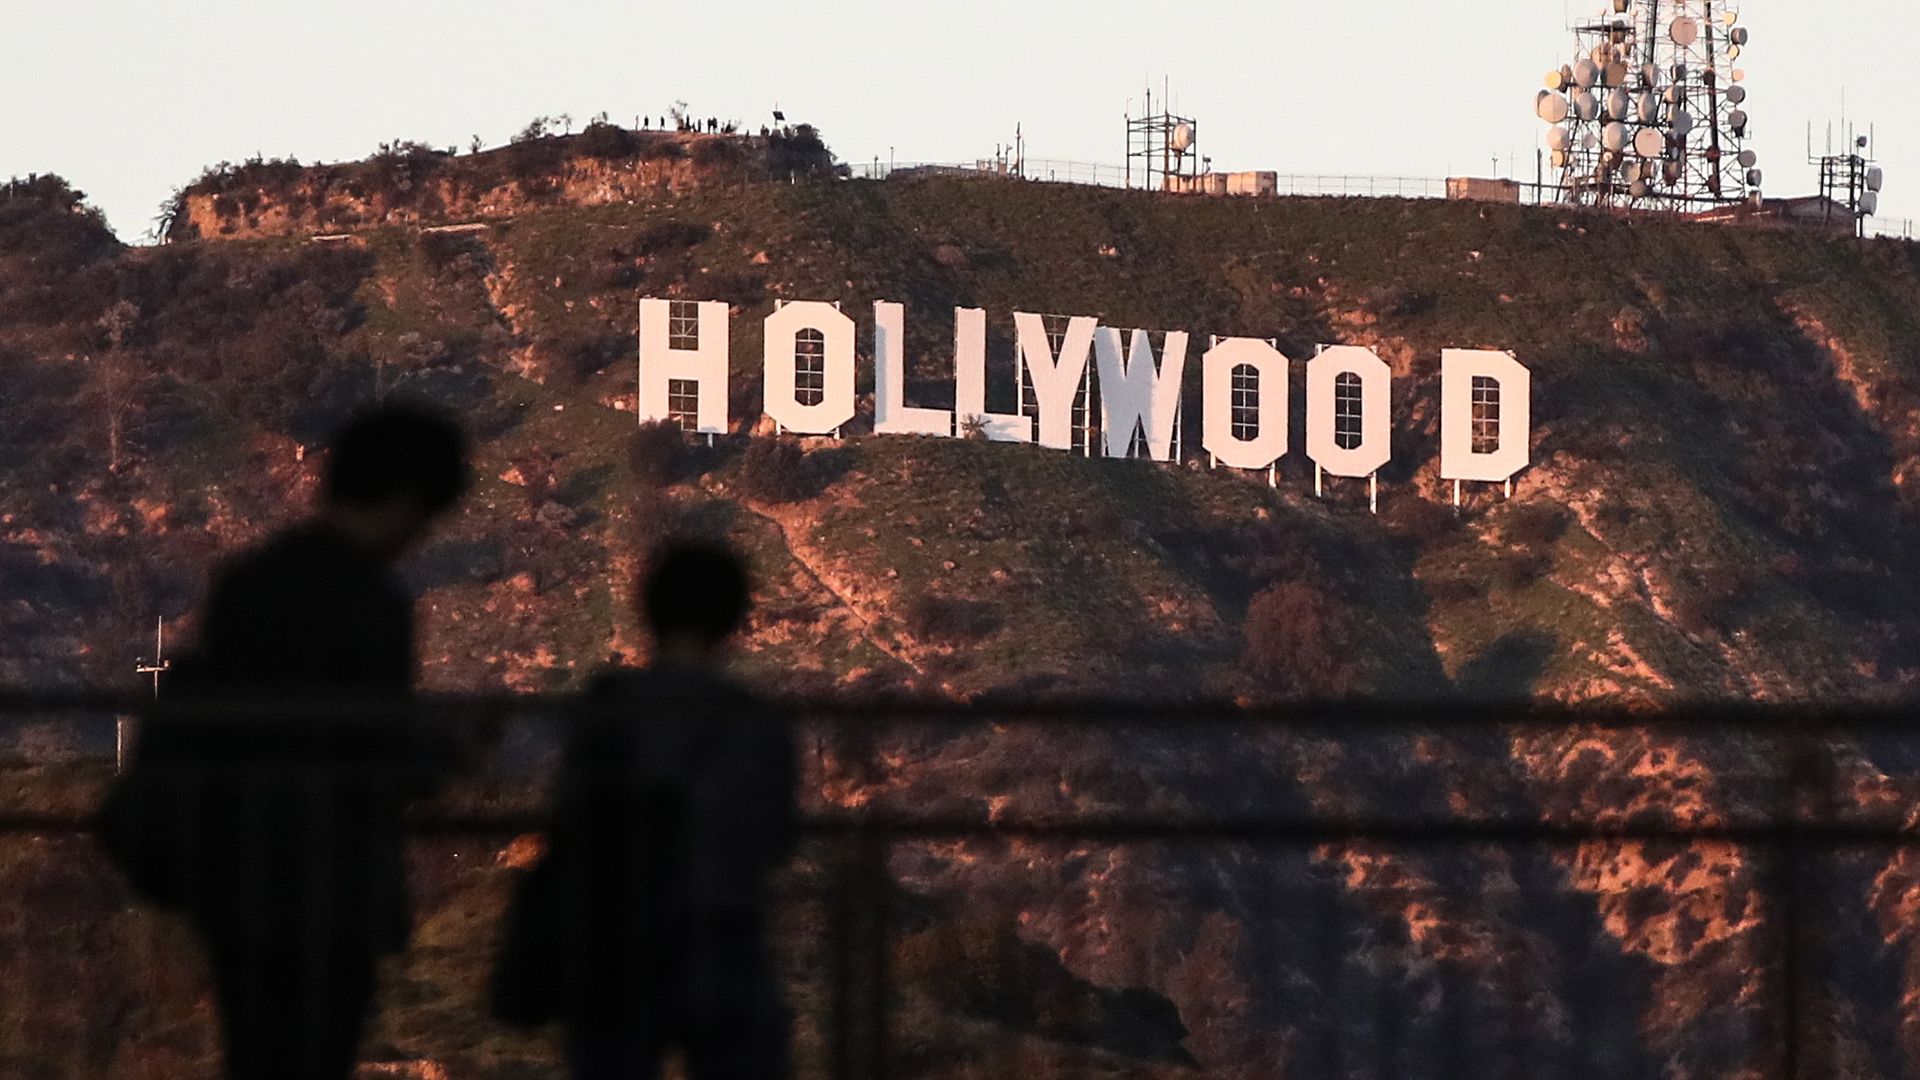 Two silhouettes in front of the Hollywood sign